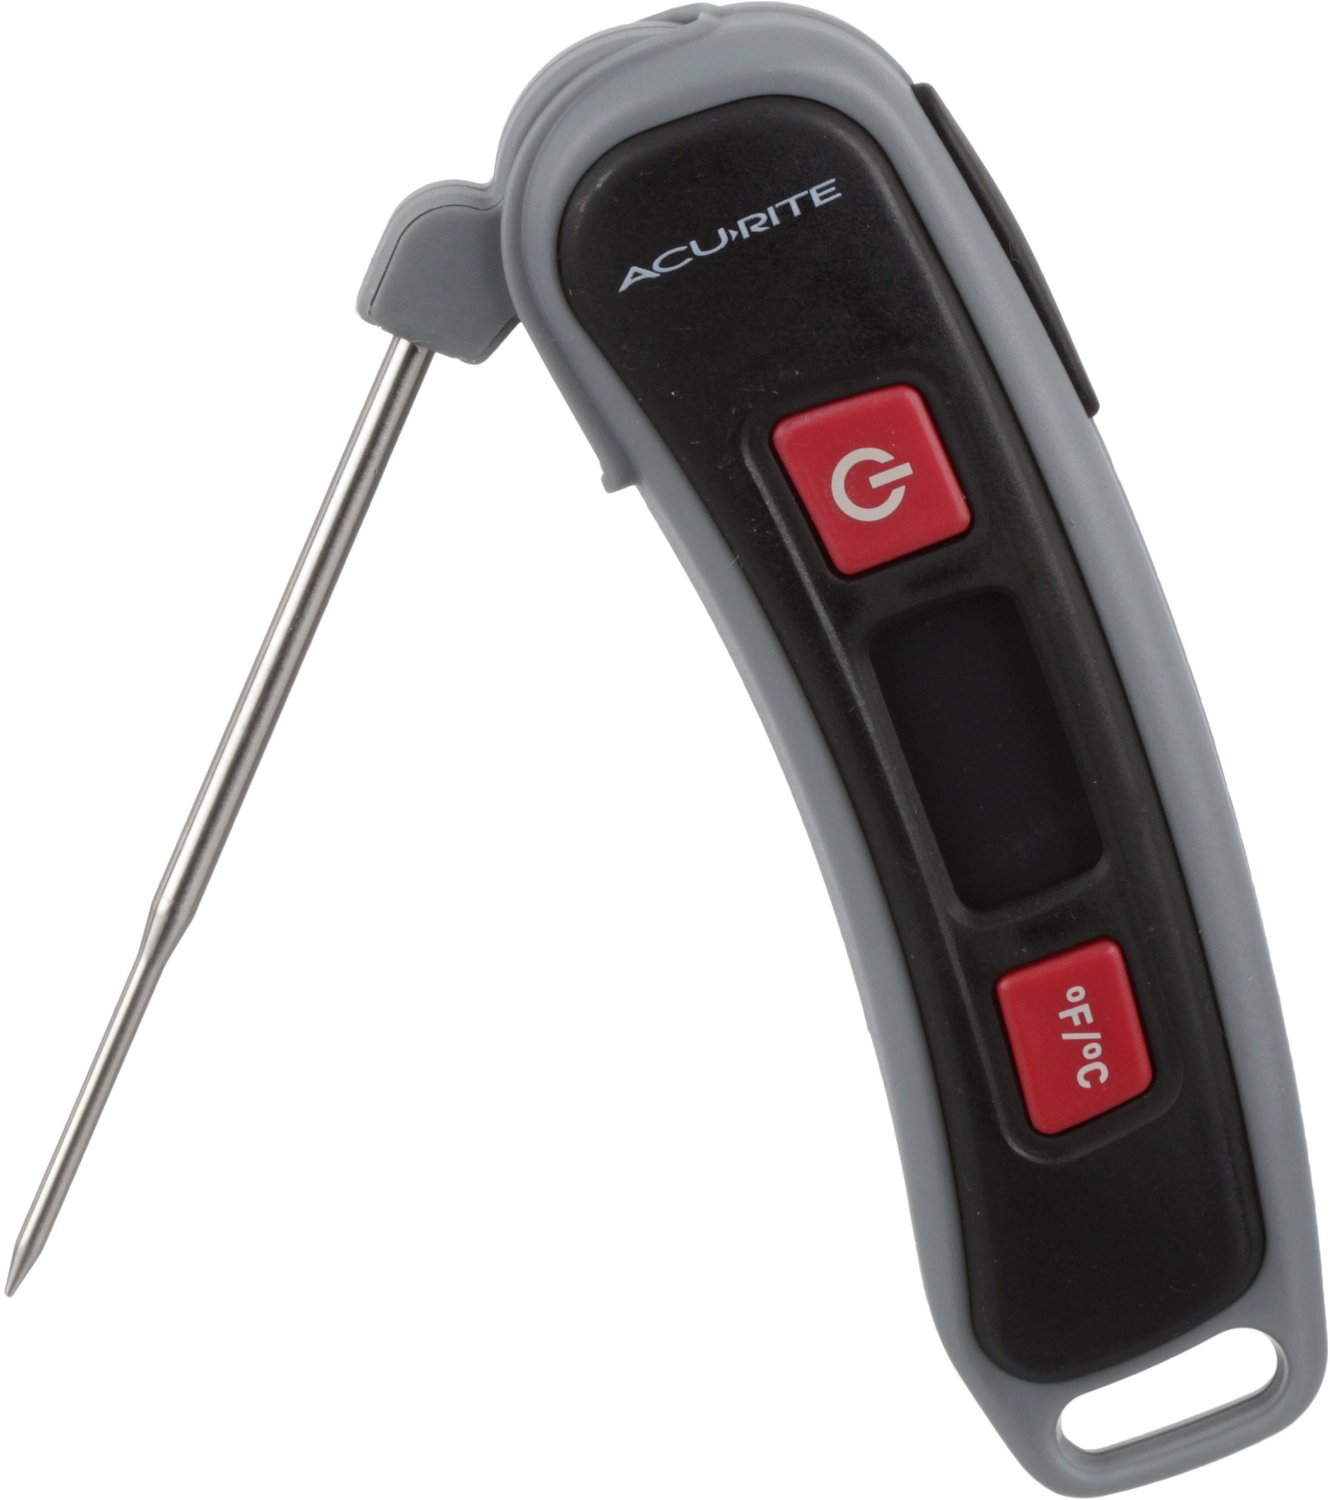 AcuRite Digital Instant-Read Thermometer with Folding Probe